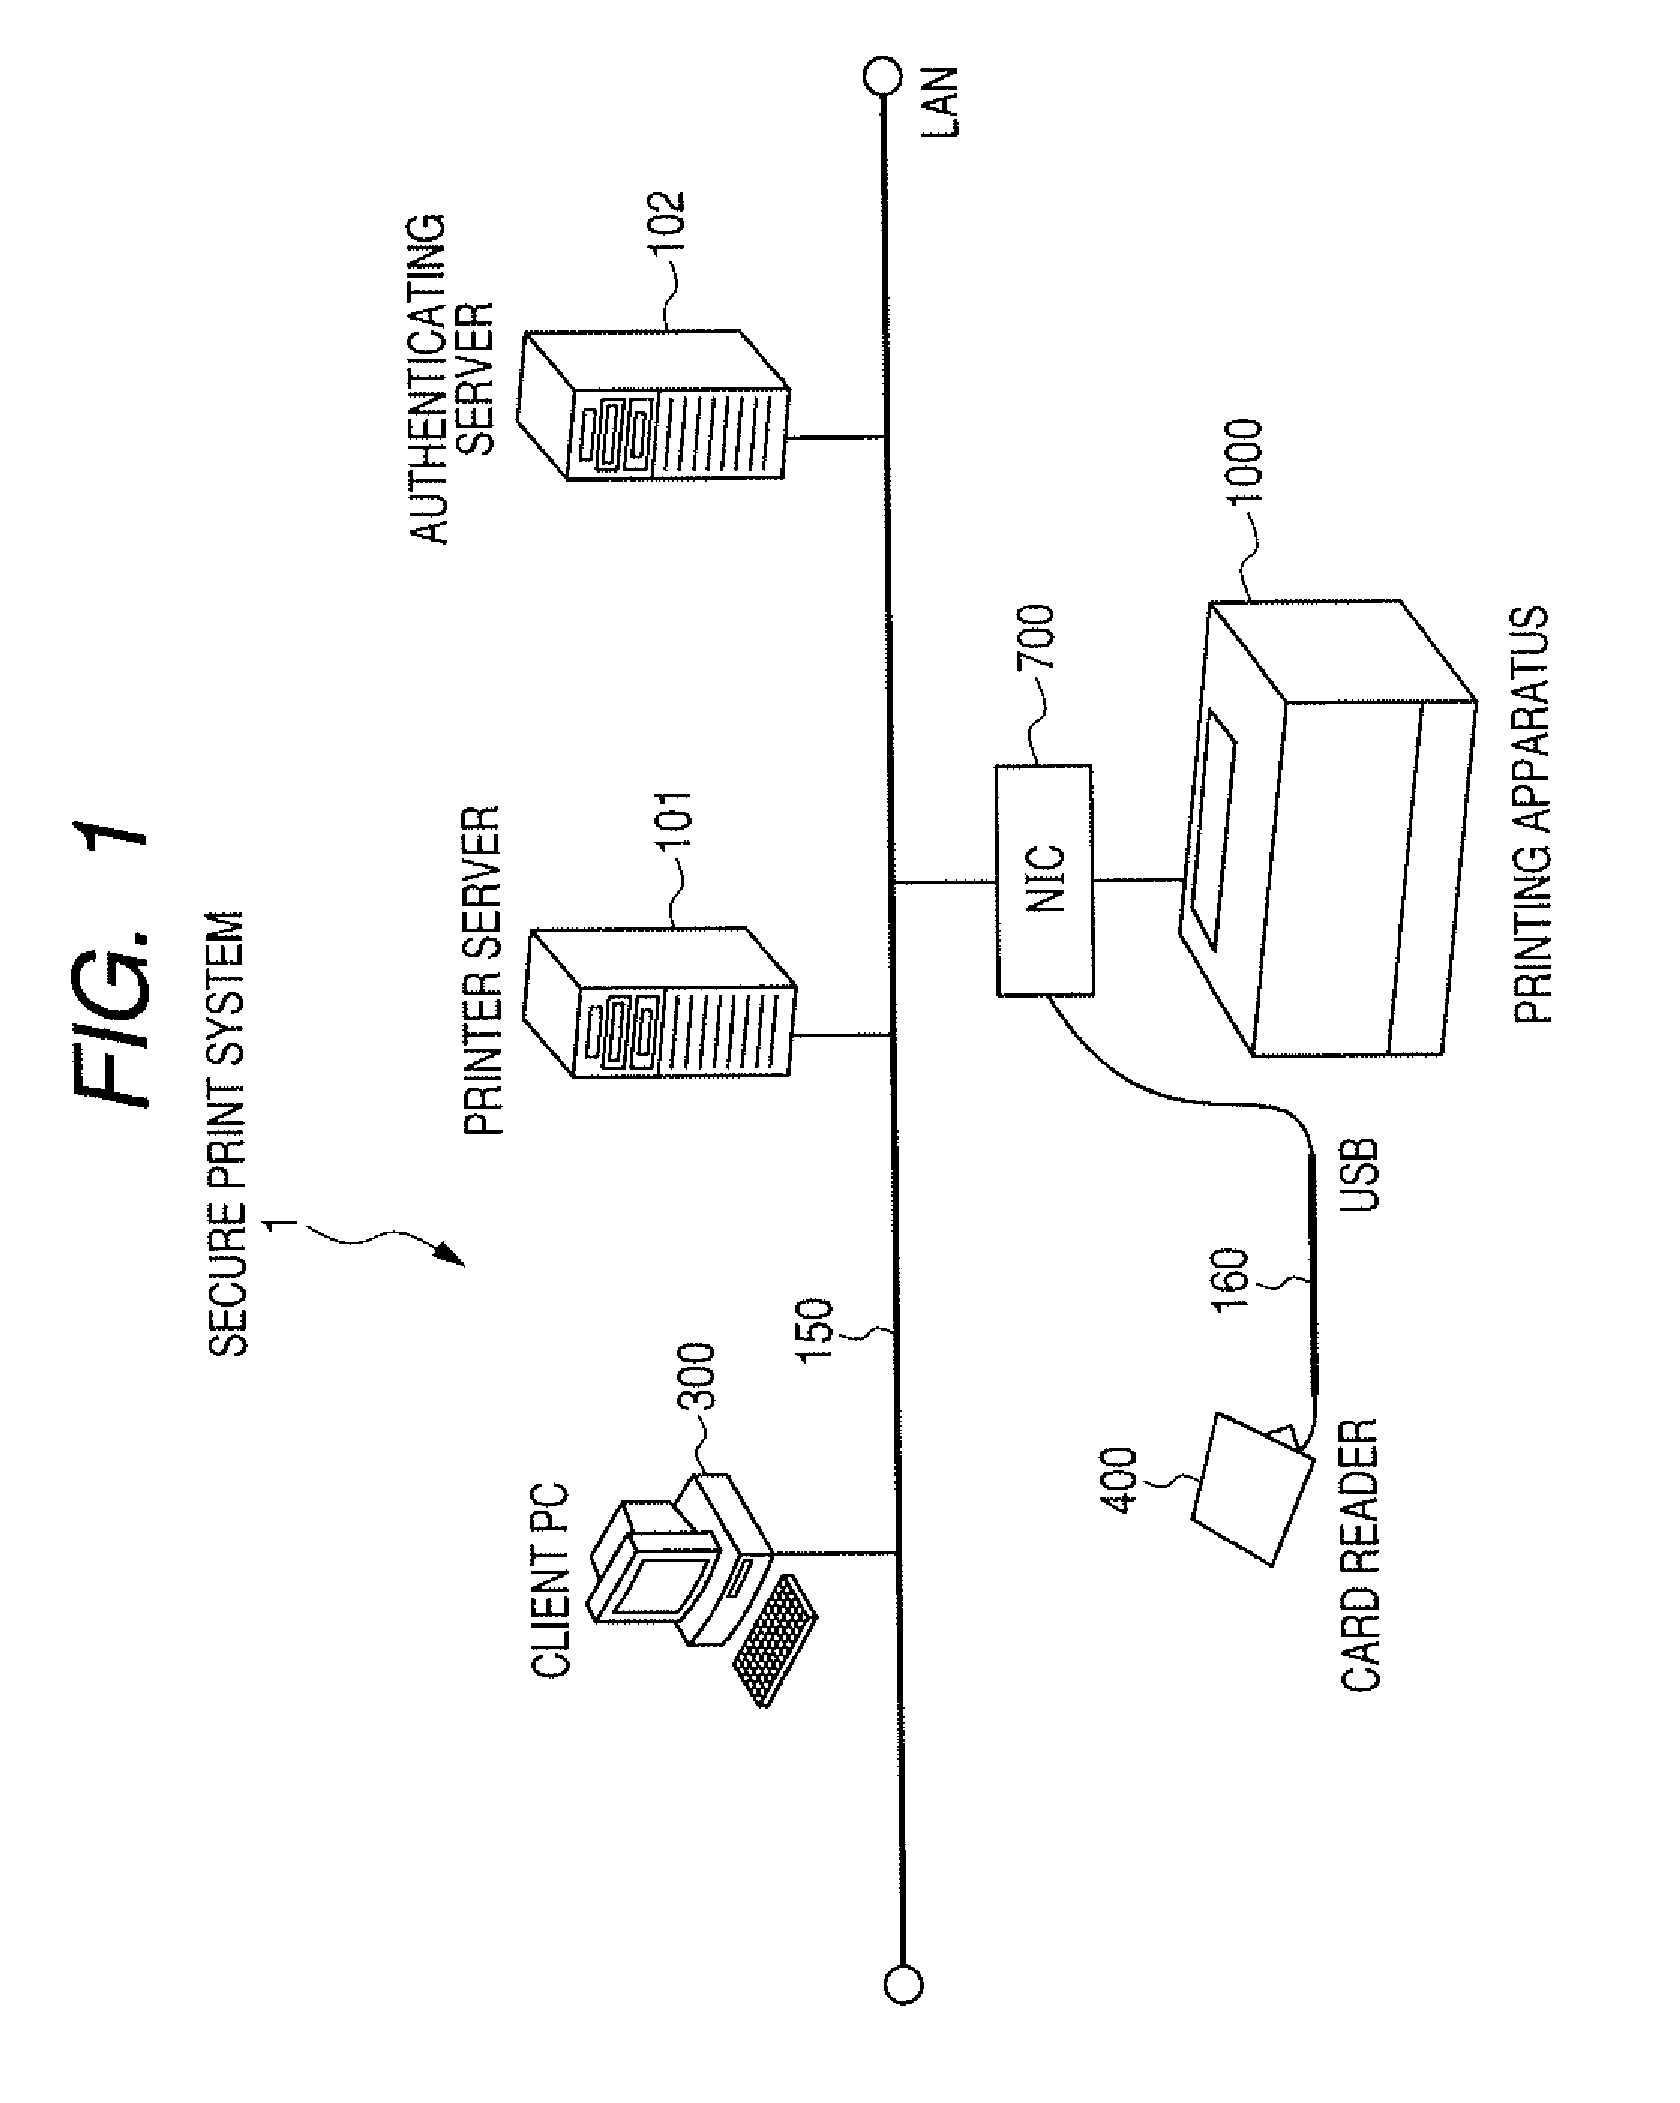 Network interface apparatus, control method, program, and image forming apparatus